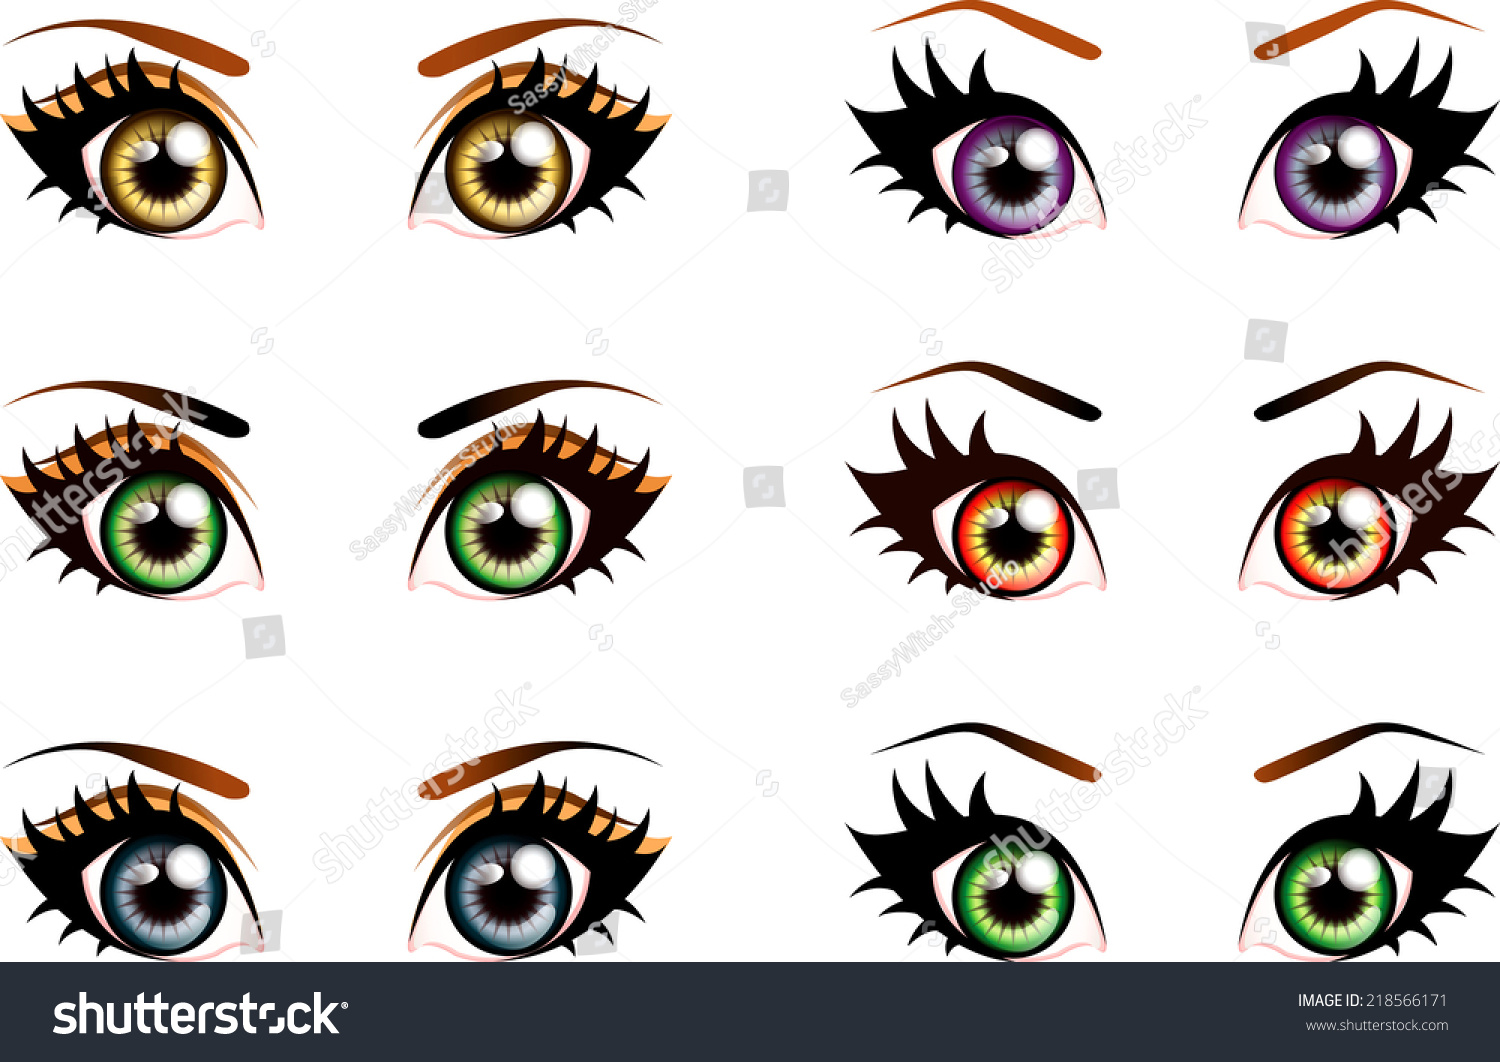 Set Of Manga, Anime Style Eyes Of Different Colors.Isolated On White